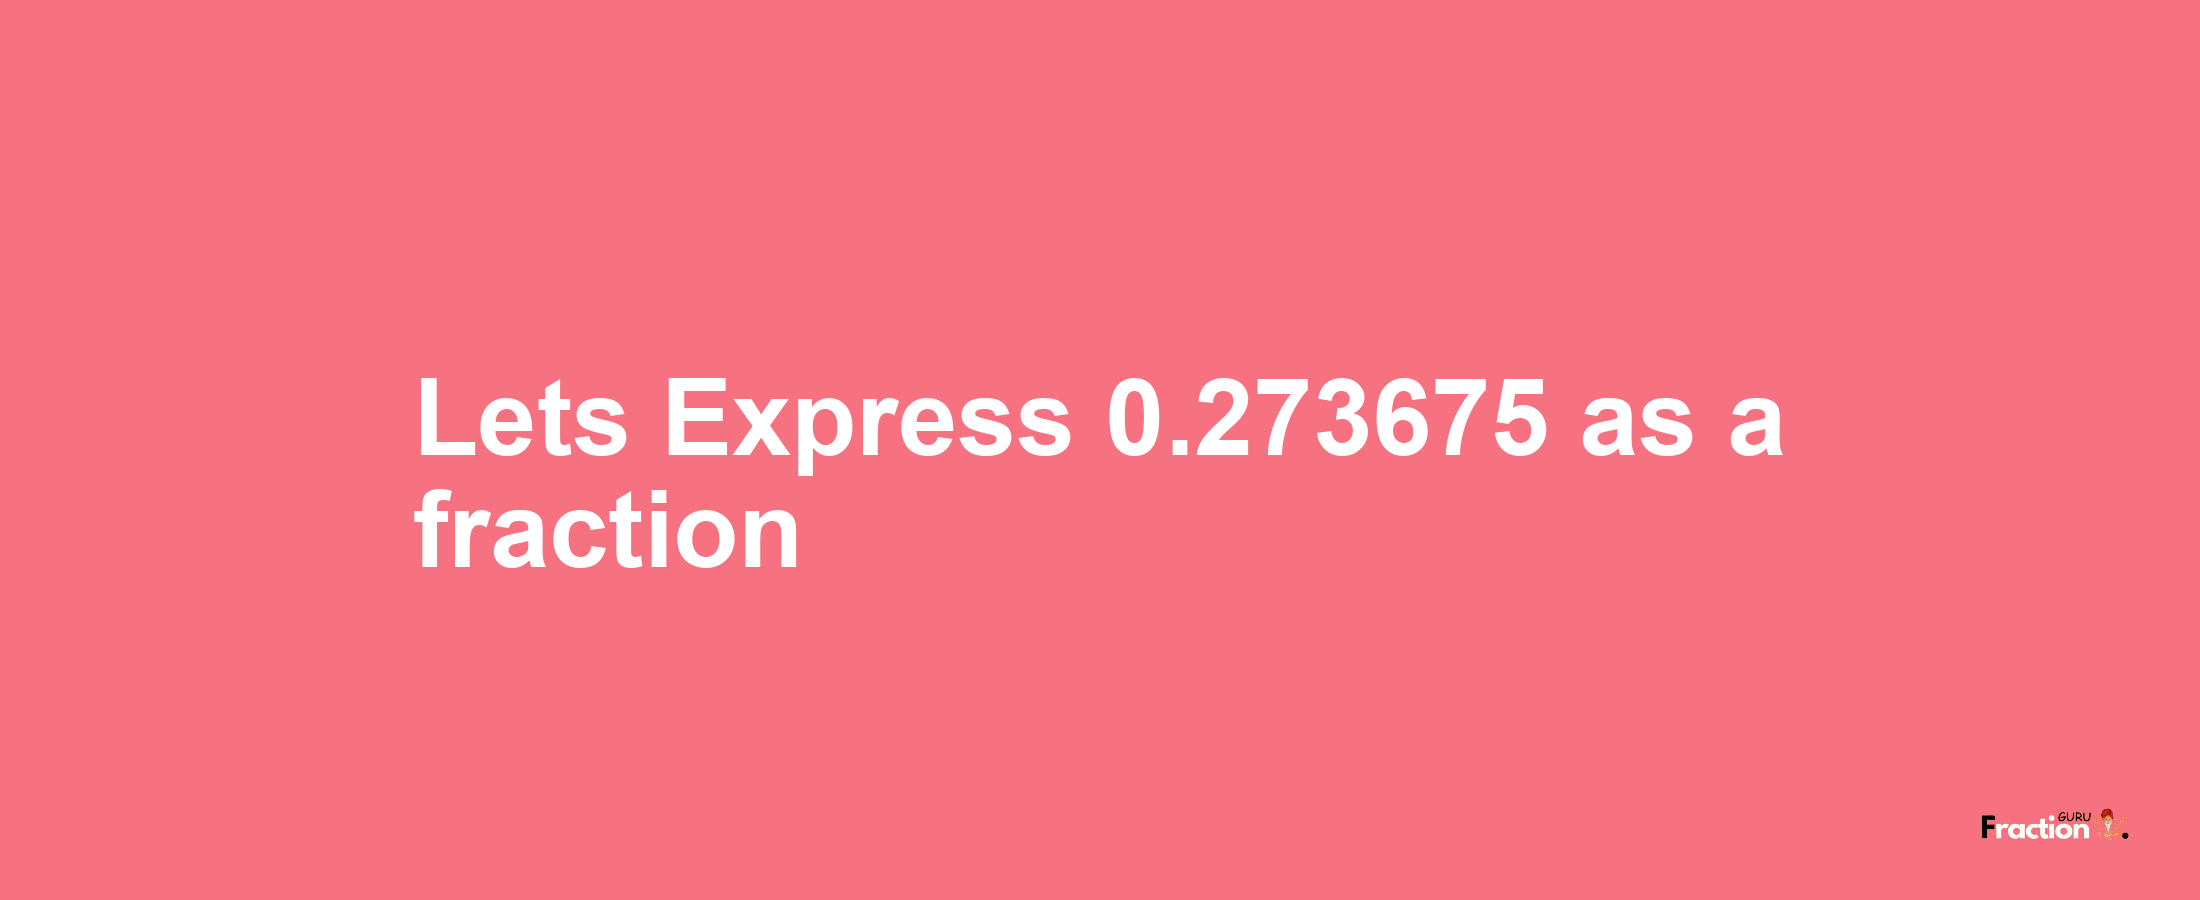 Lets Express 0.273675 as afraction